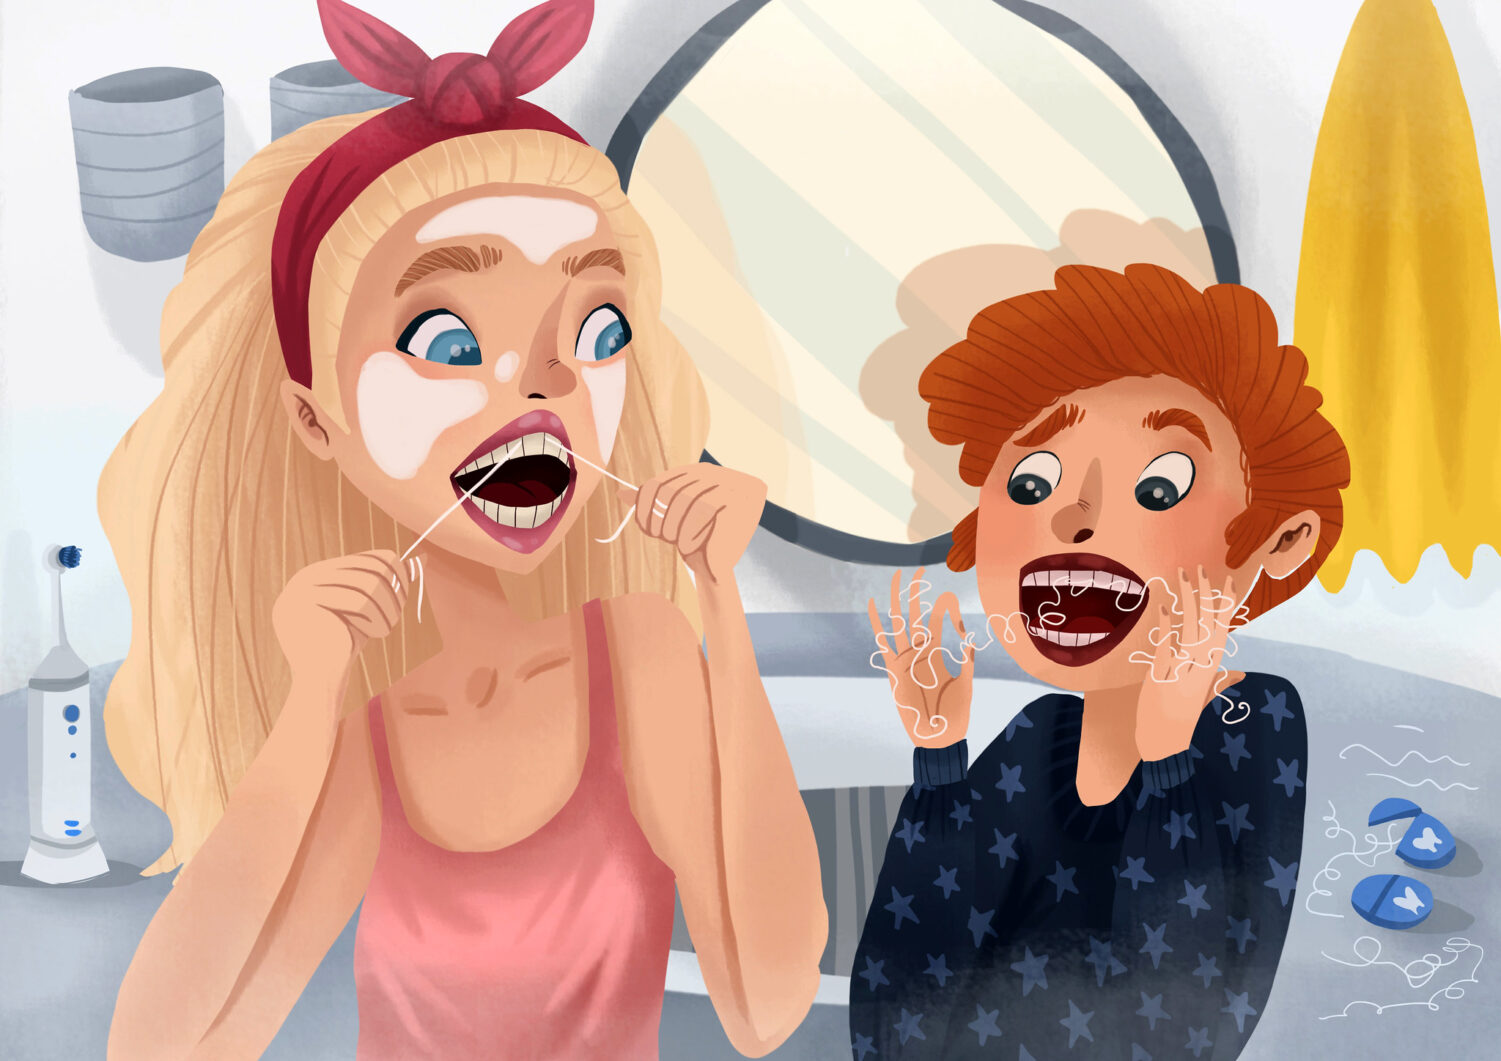 Graphic illustration of two people learning the right way to floss with string floss.